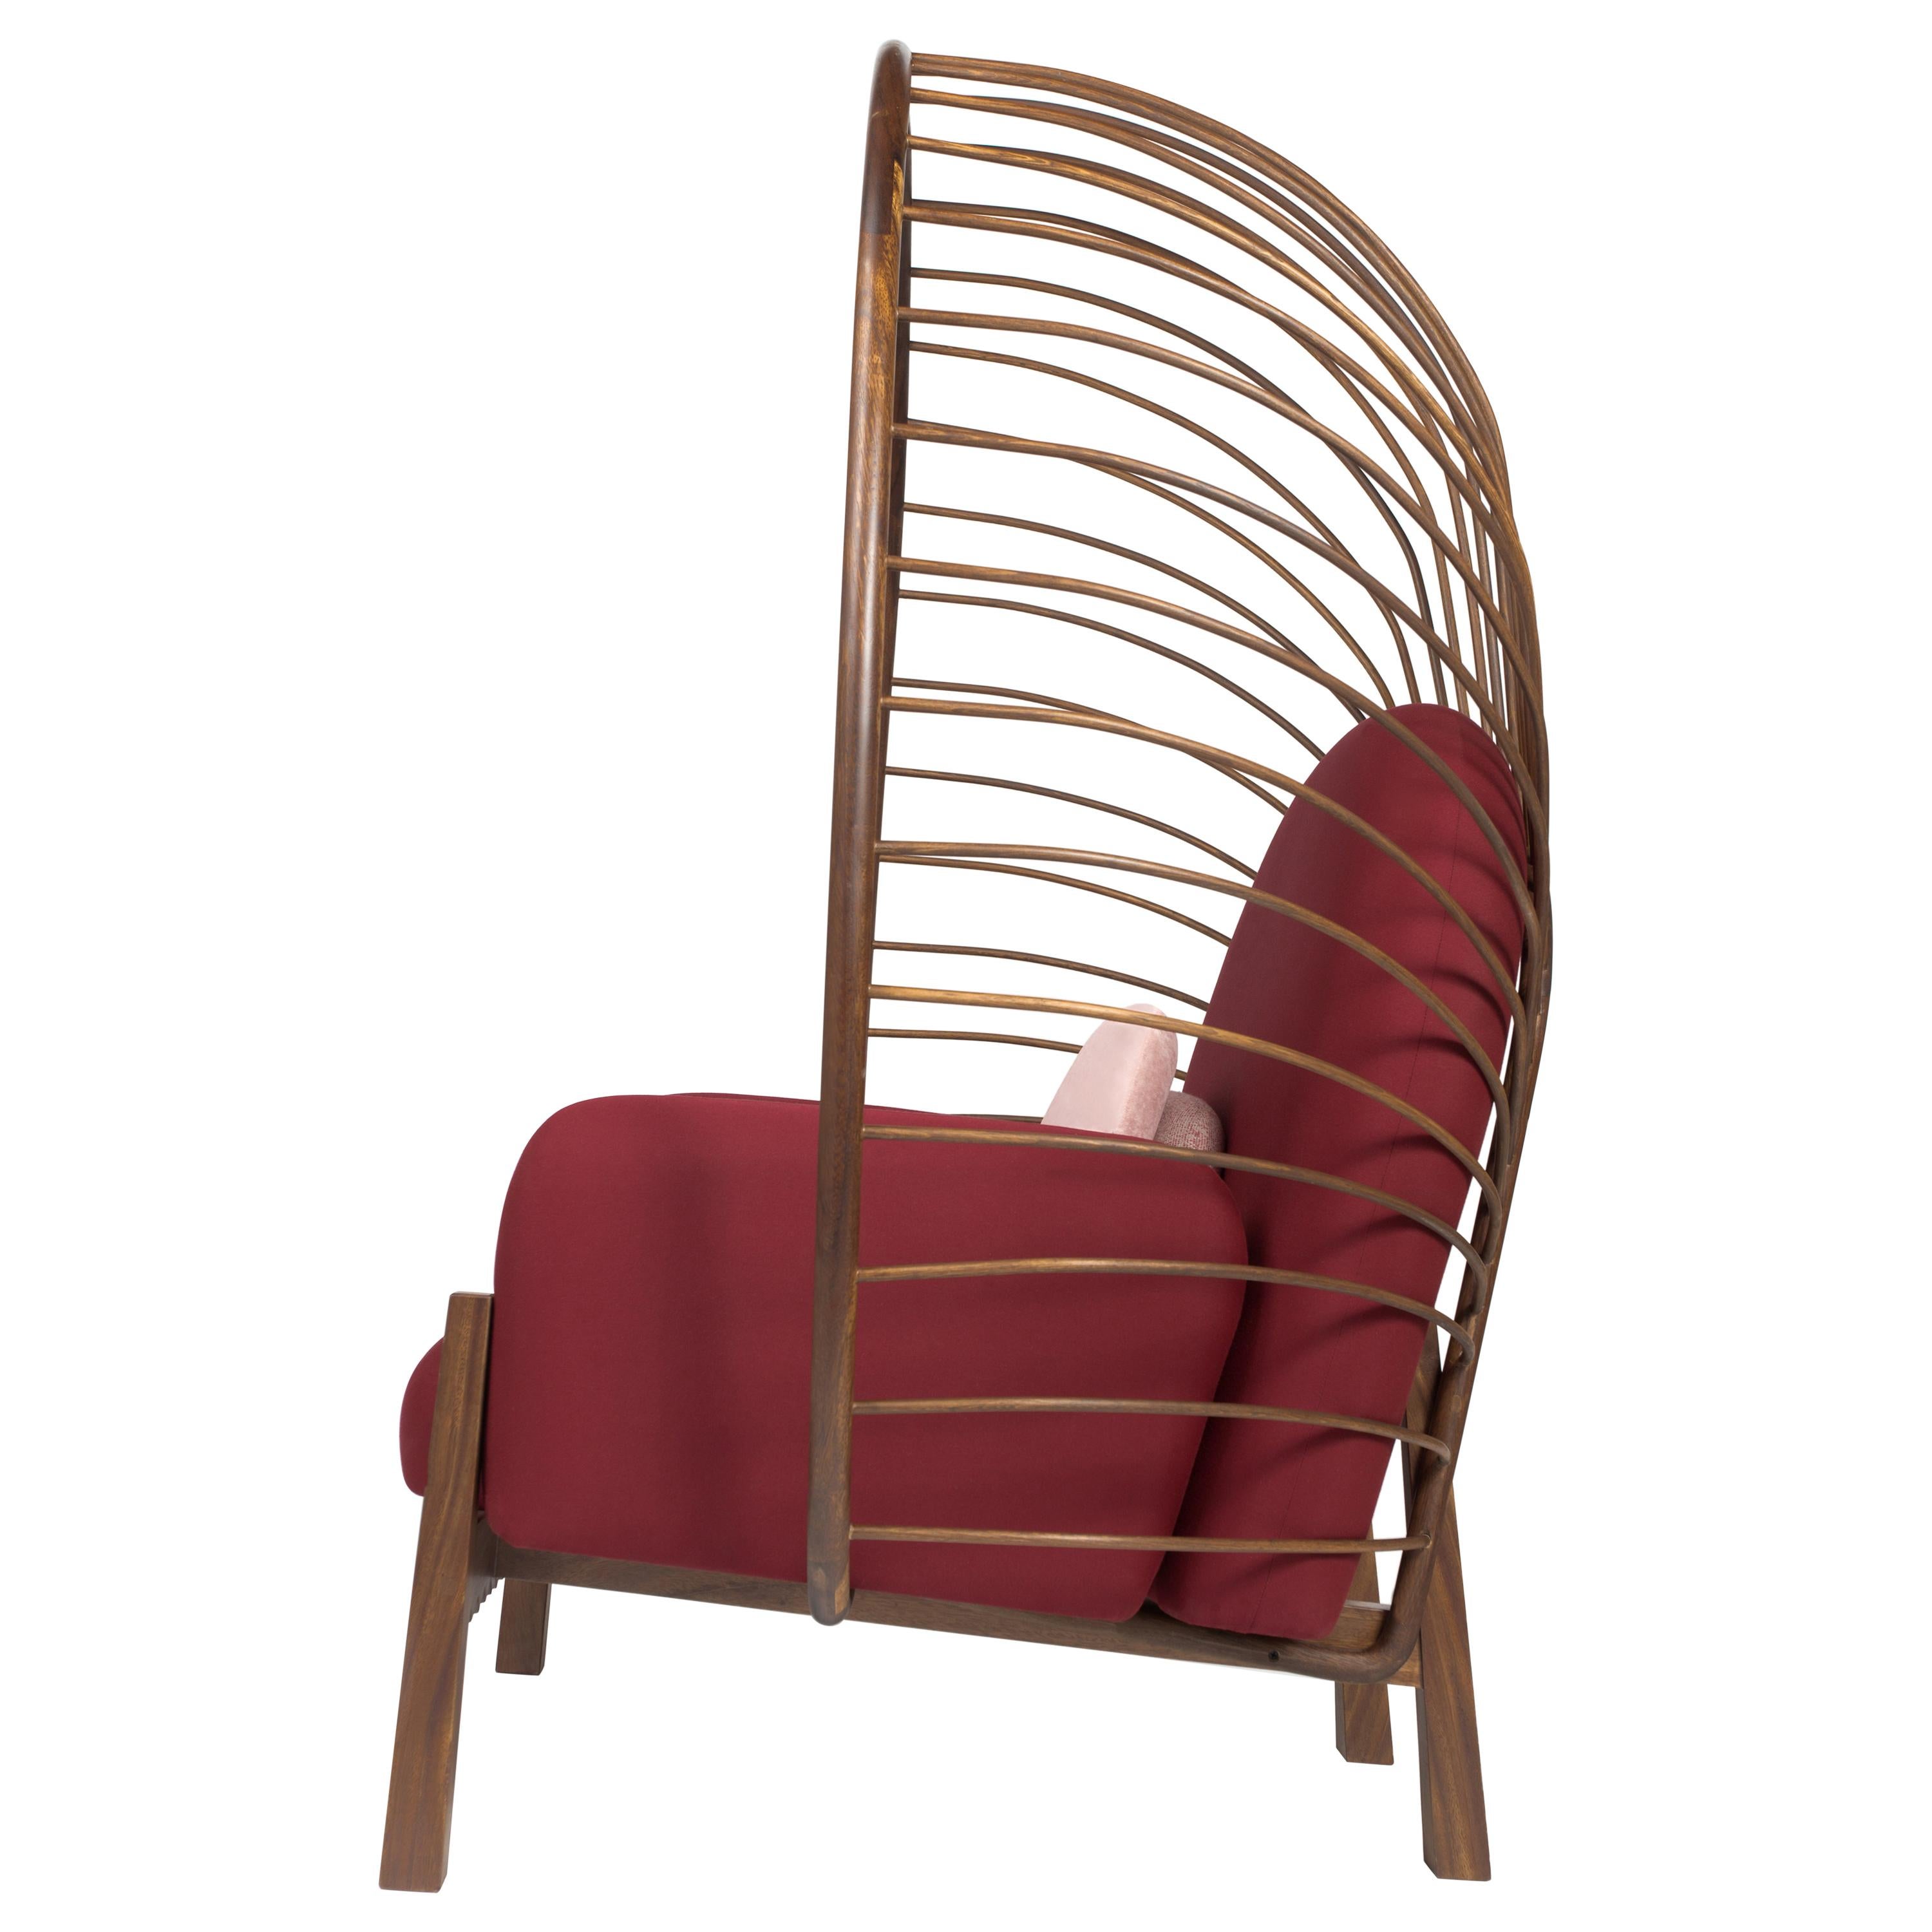 This elegant and striking armchair was designed to highlight outdoor spaces with its magnitude and organic form. Perfect for a relaxing outdoor area.  One can almost feel protected by its crown backing. Made of solid tropical Huanacaxtle wood. The